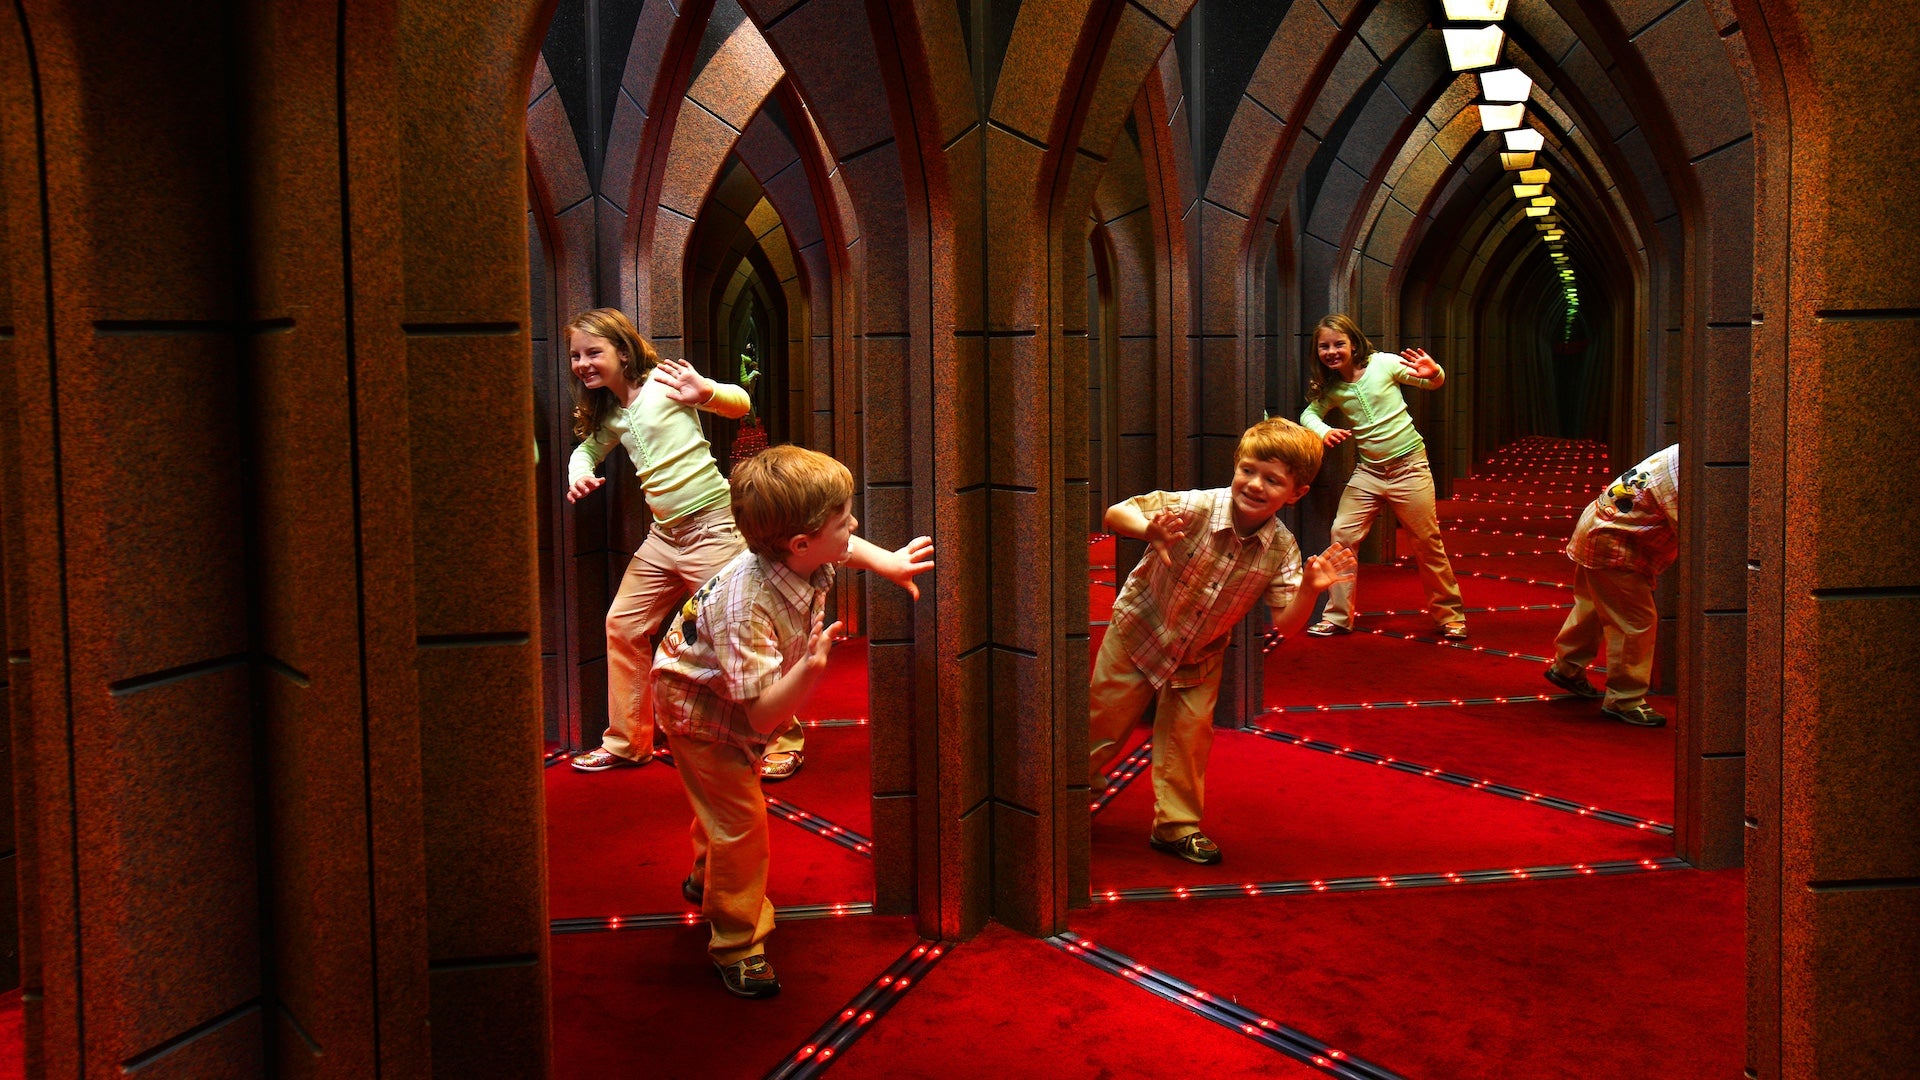 A boy and a girl playing in a mirror maze room